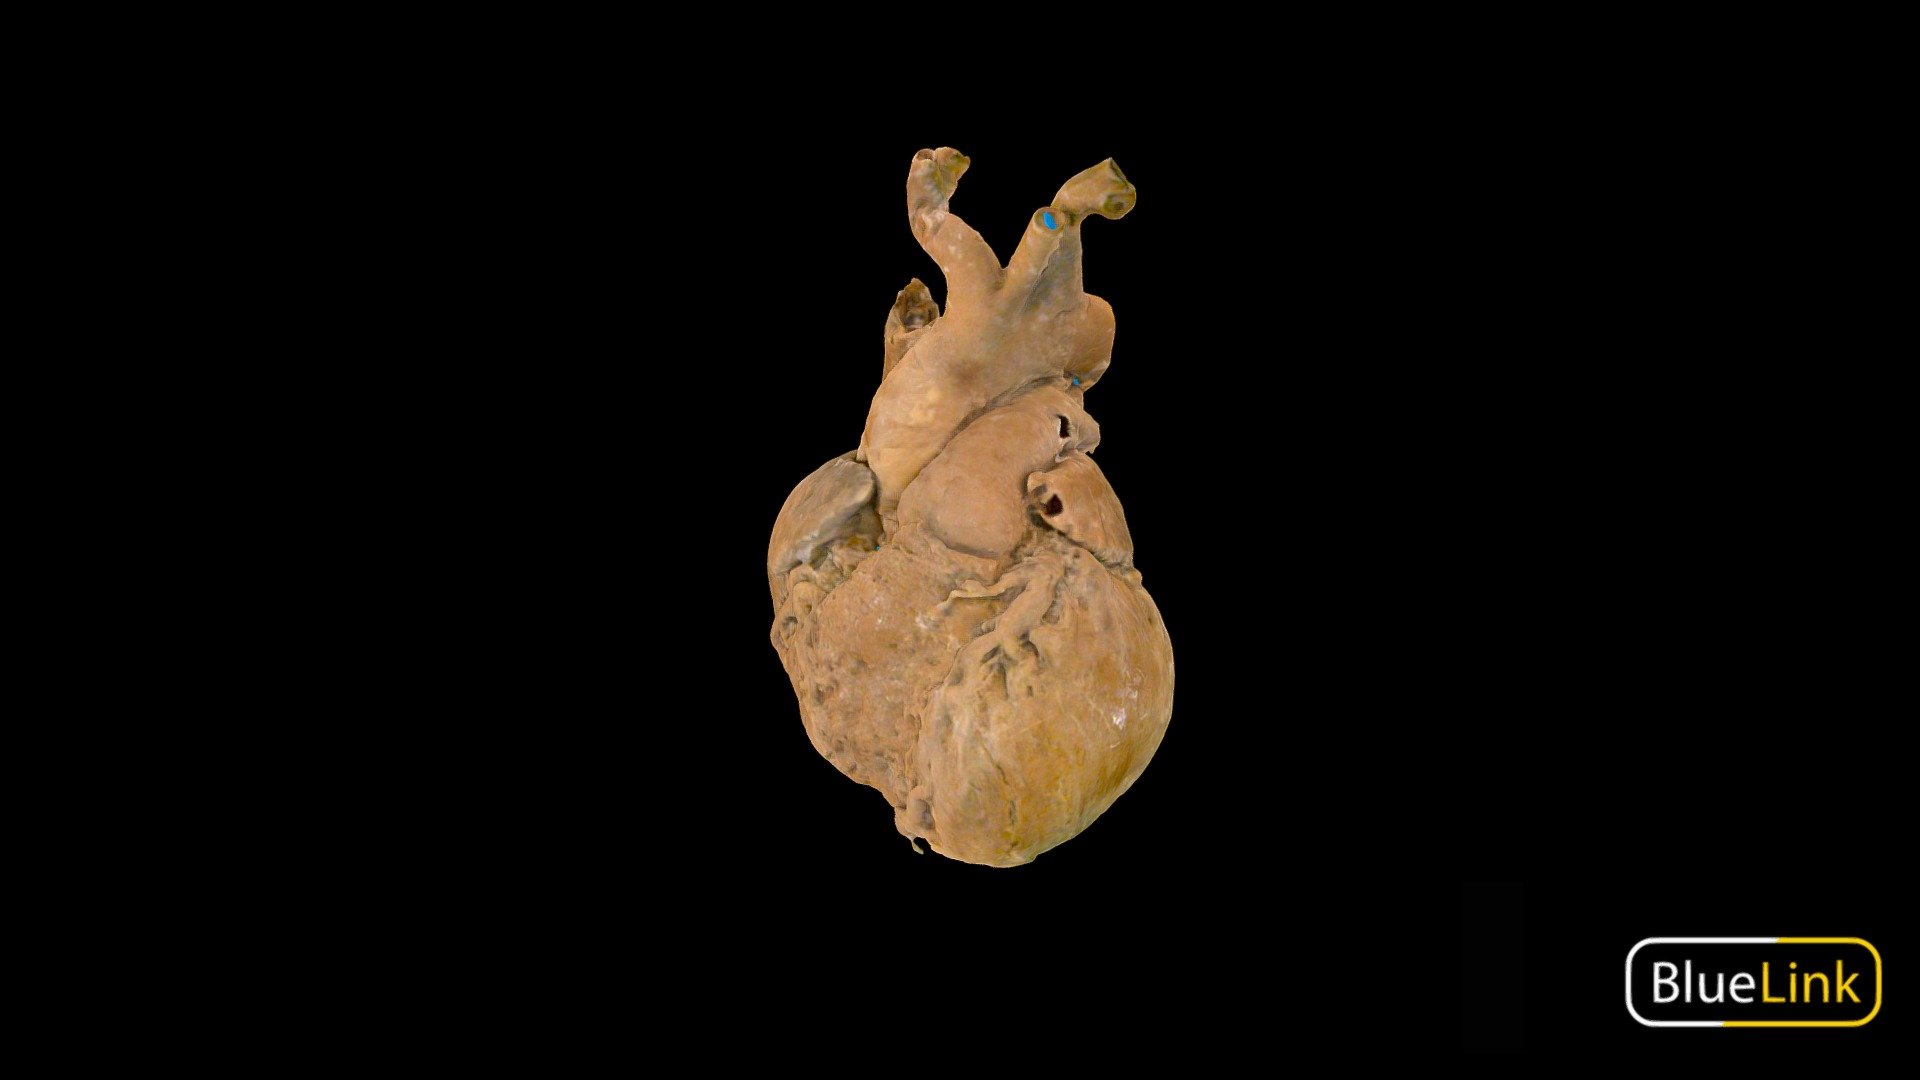 3D scan of a plastinated heart

Captured with Einscan Pro

Captured and edited by: Madelyn Murphy, Will Gribbin, Cristina Prall

Copyright 2019 BK Alsup &amp; GM Fox - Heart - Plastinated, Labeled - 3D model by Bluelink Anatomy - University of Michigan (@bluelinkanatomy) 3d model